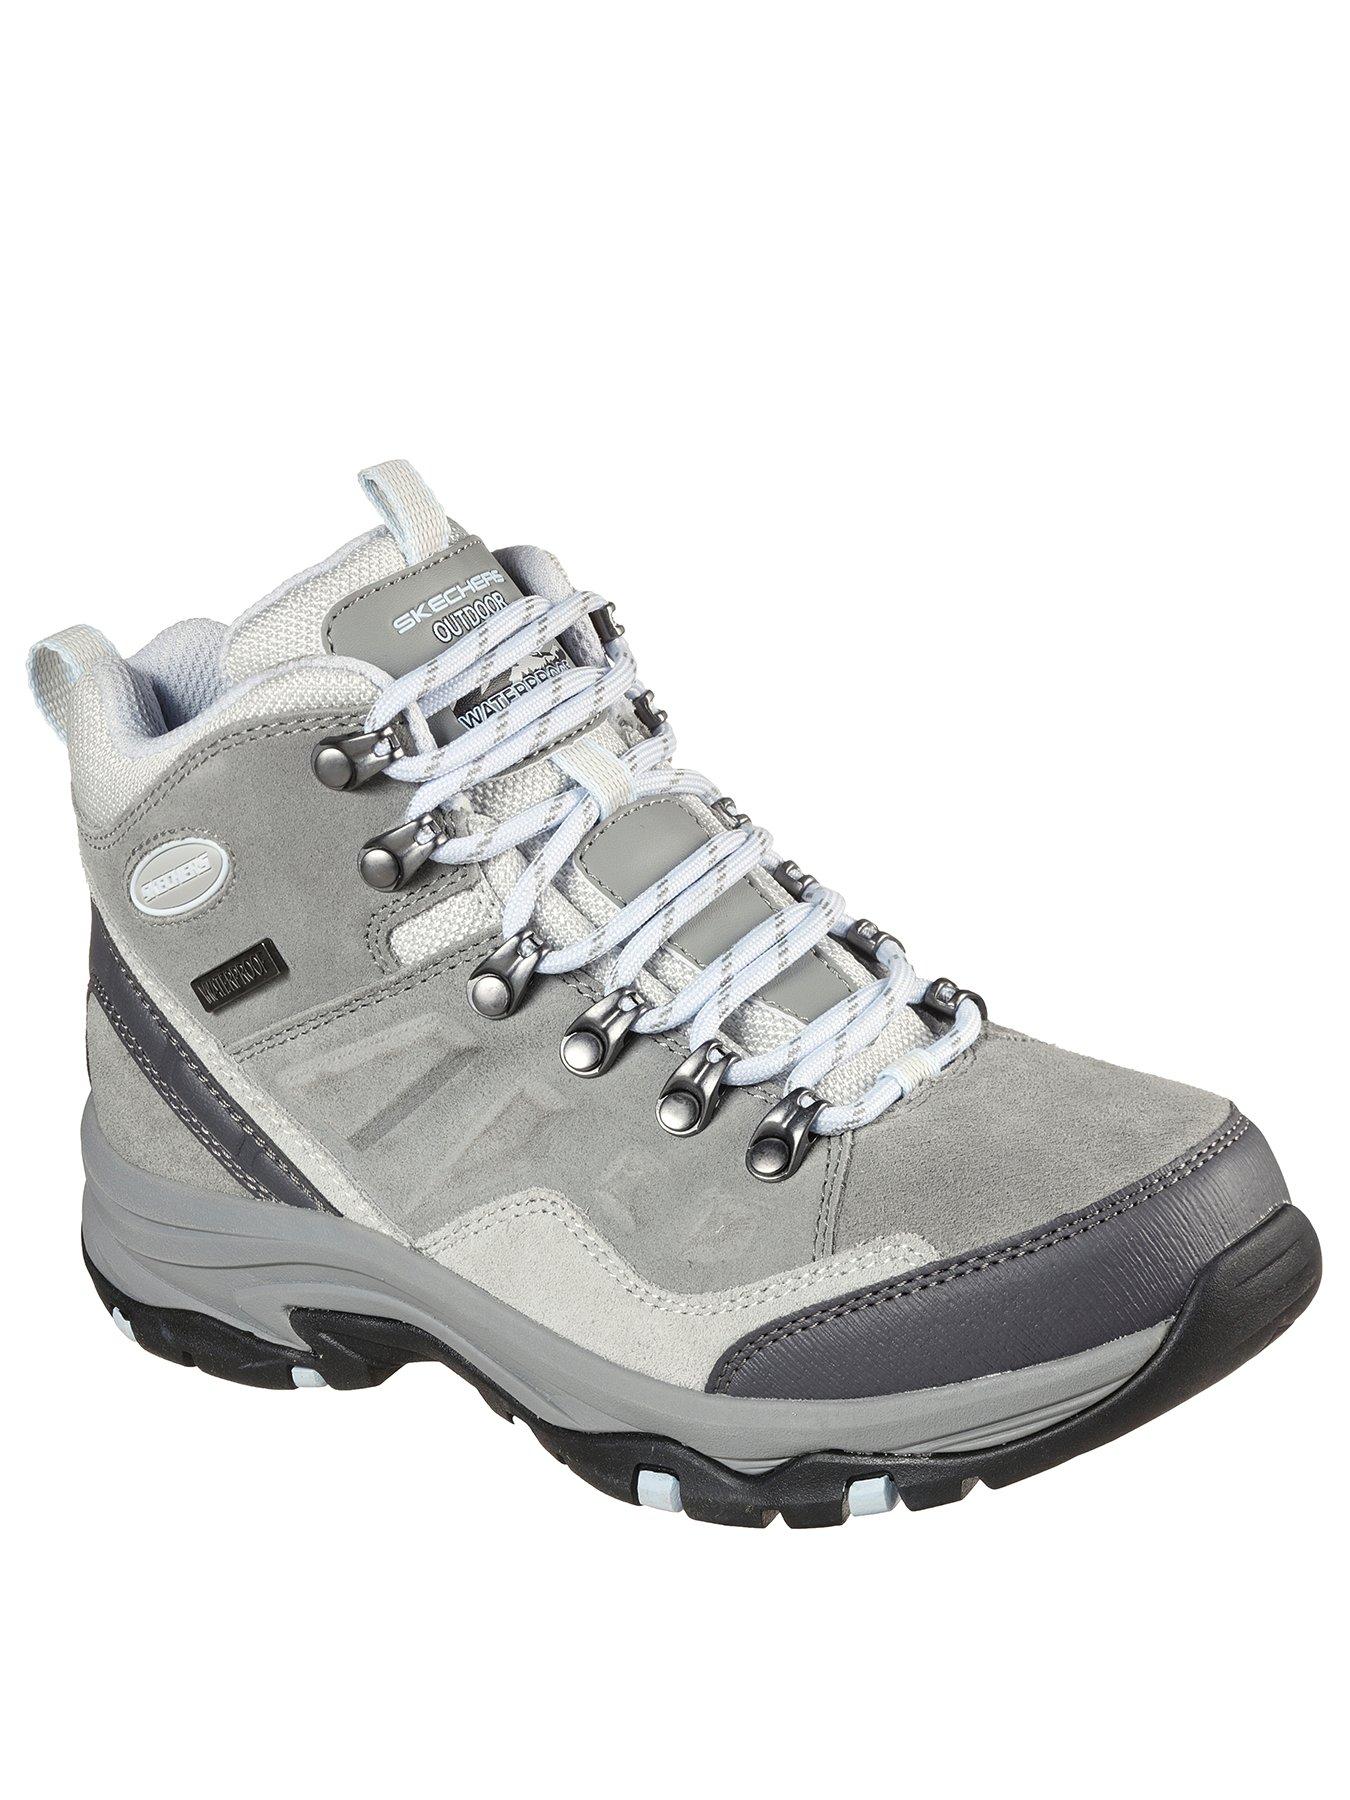  Trego Walking Boots